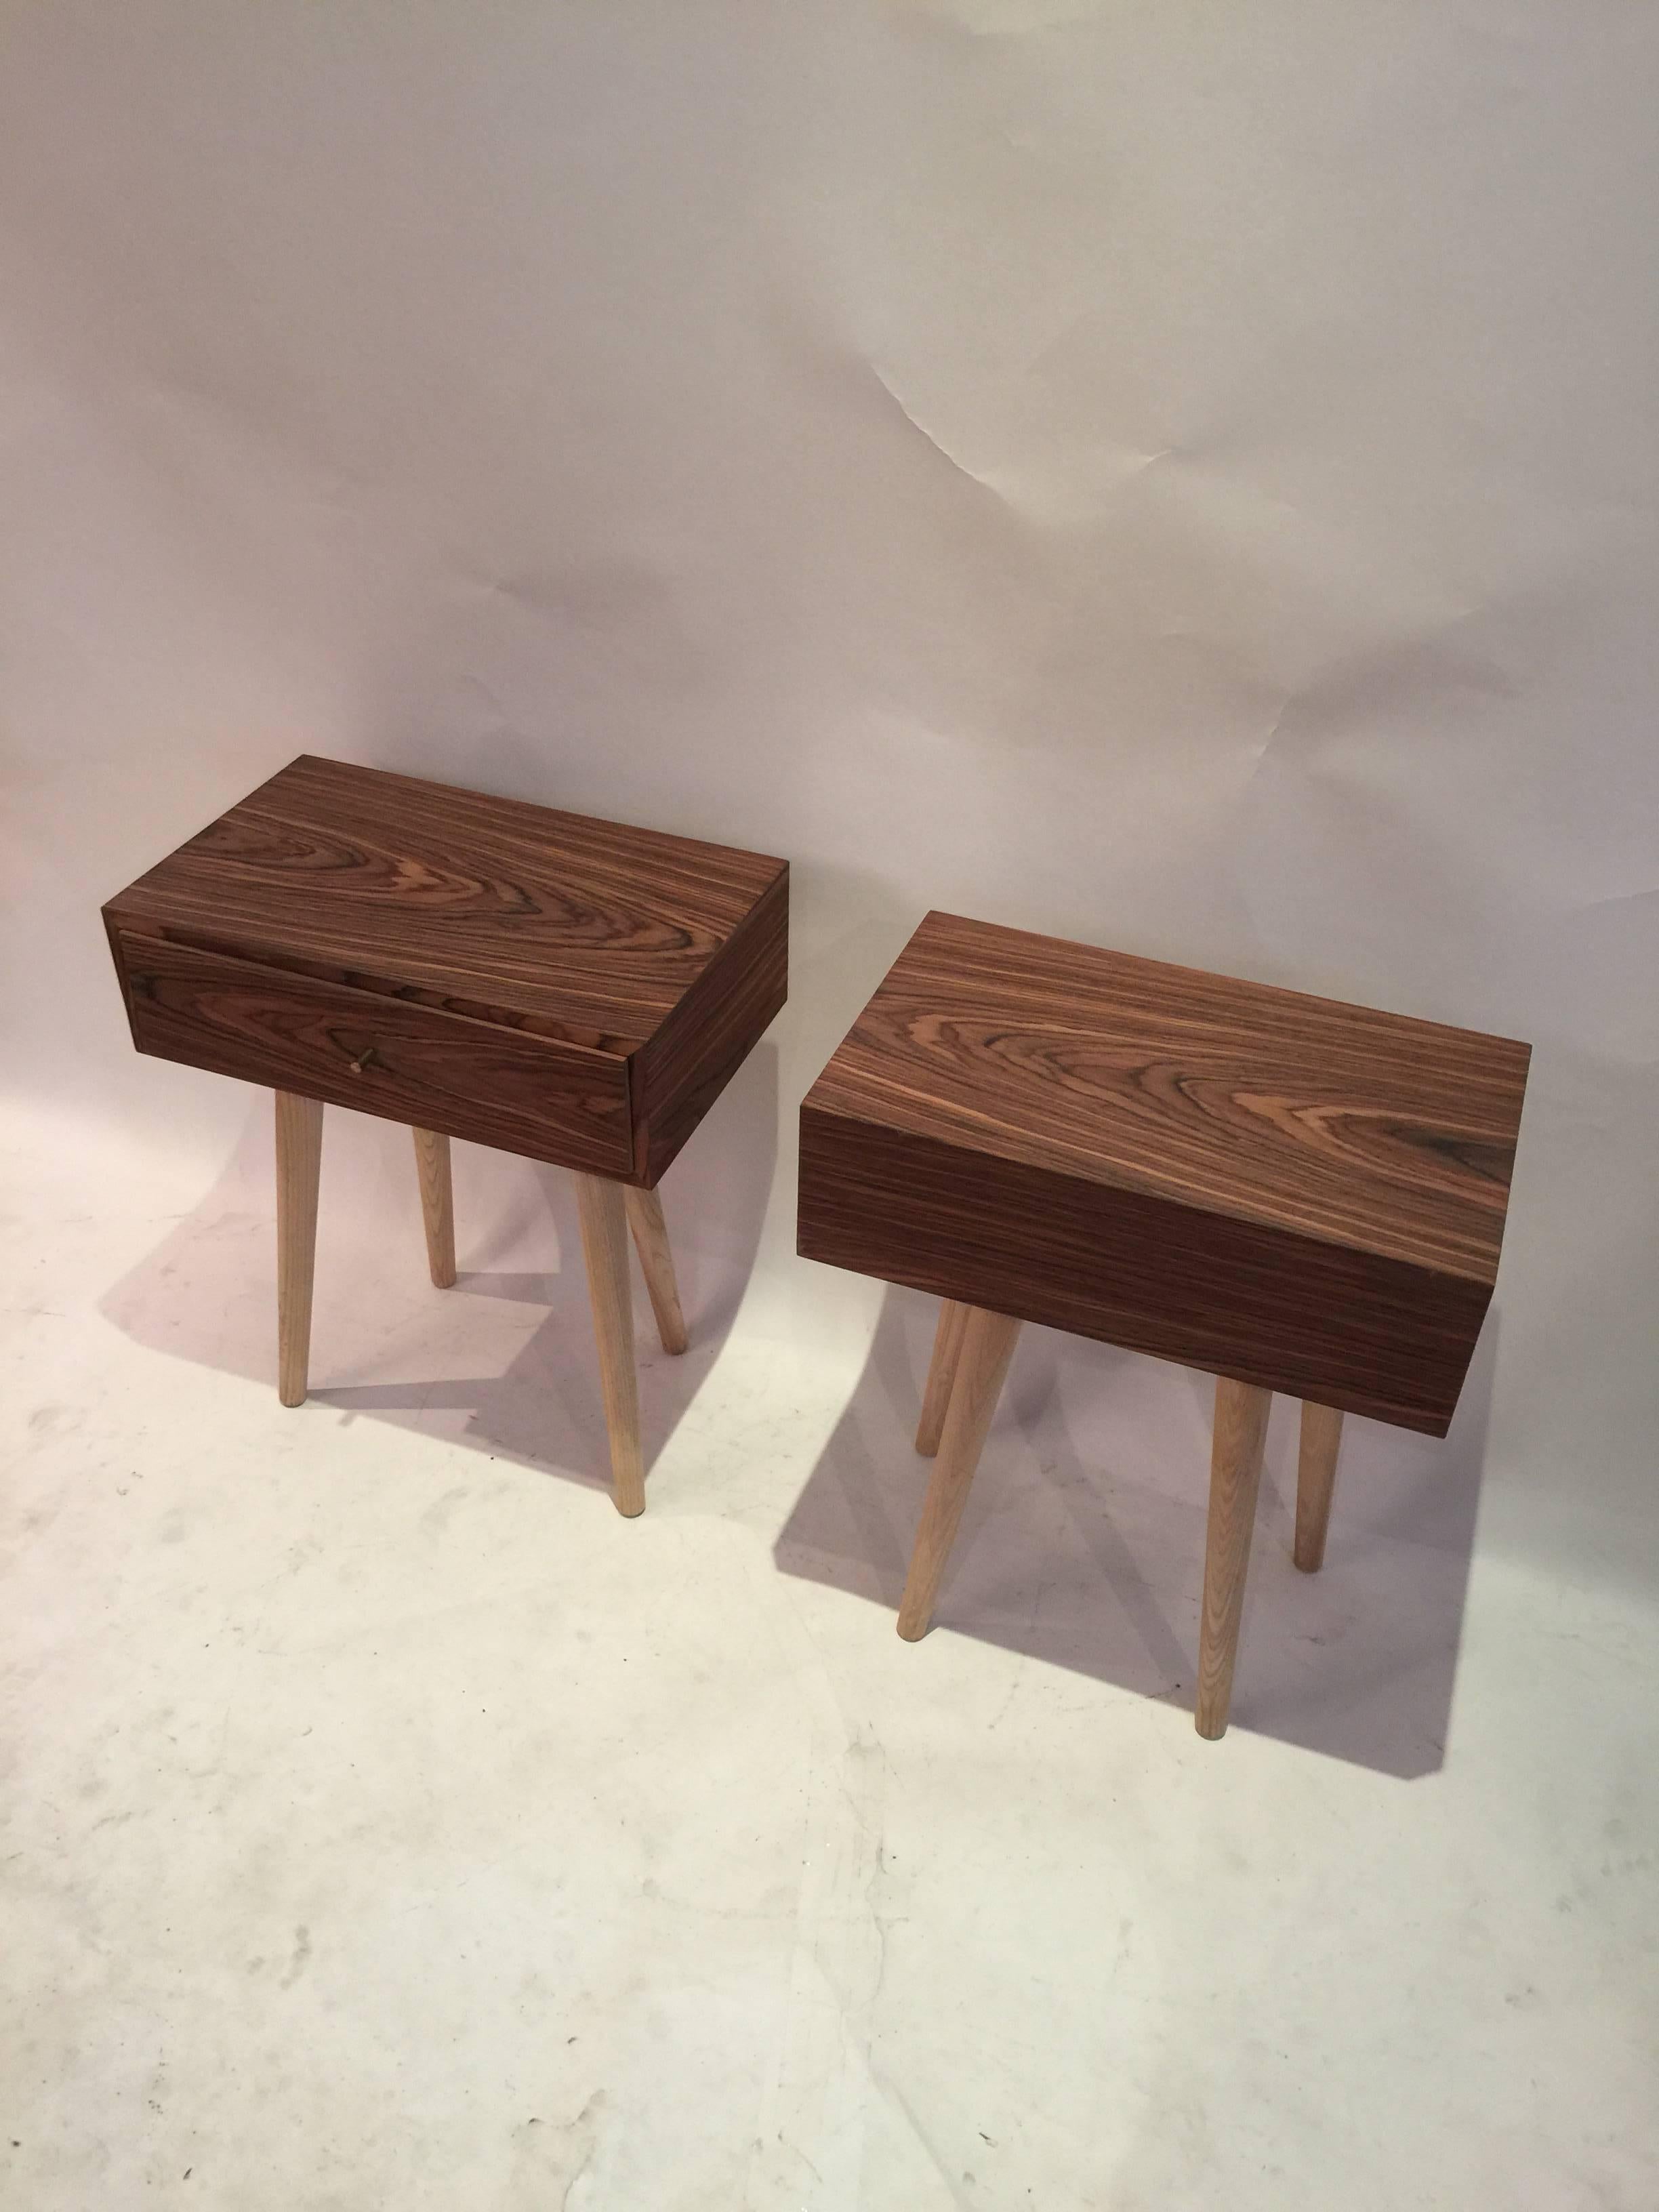 Pair of old growth recycled rosewood and blonde ash legs accented by brass pulse and heavy duty hardware. Striking minimal design by Danish furniture maker Re.collection.
    